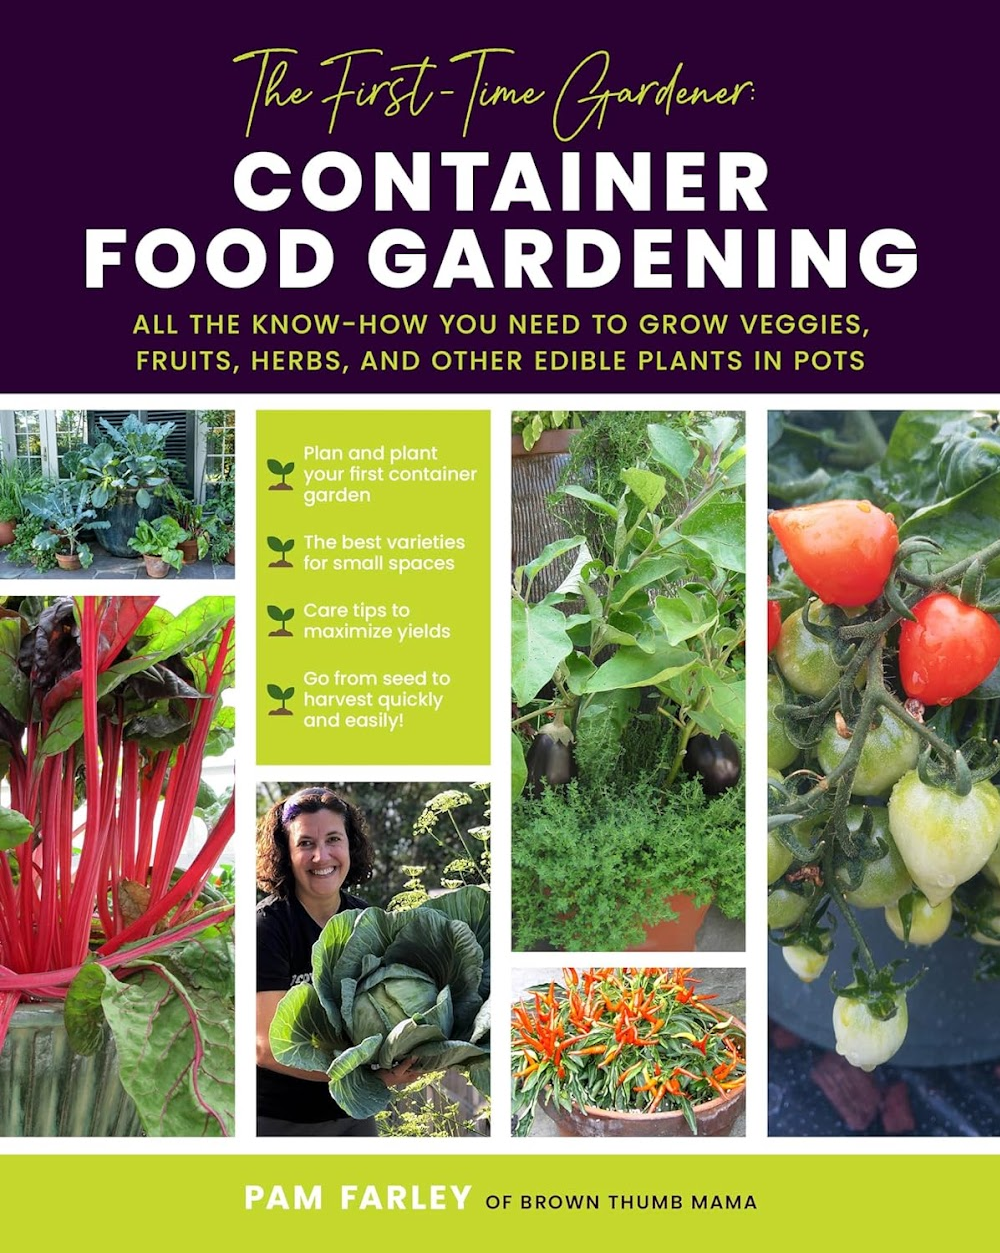 The First Time Gardener - Container Food Gardening